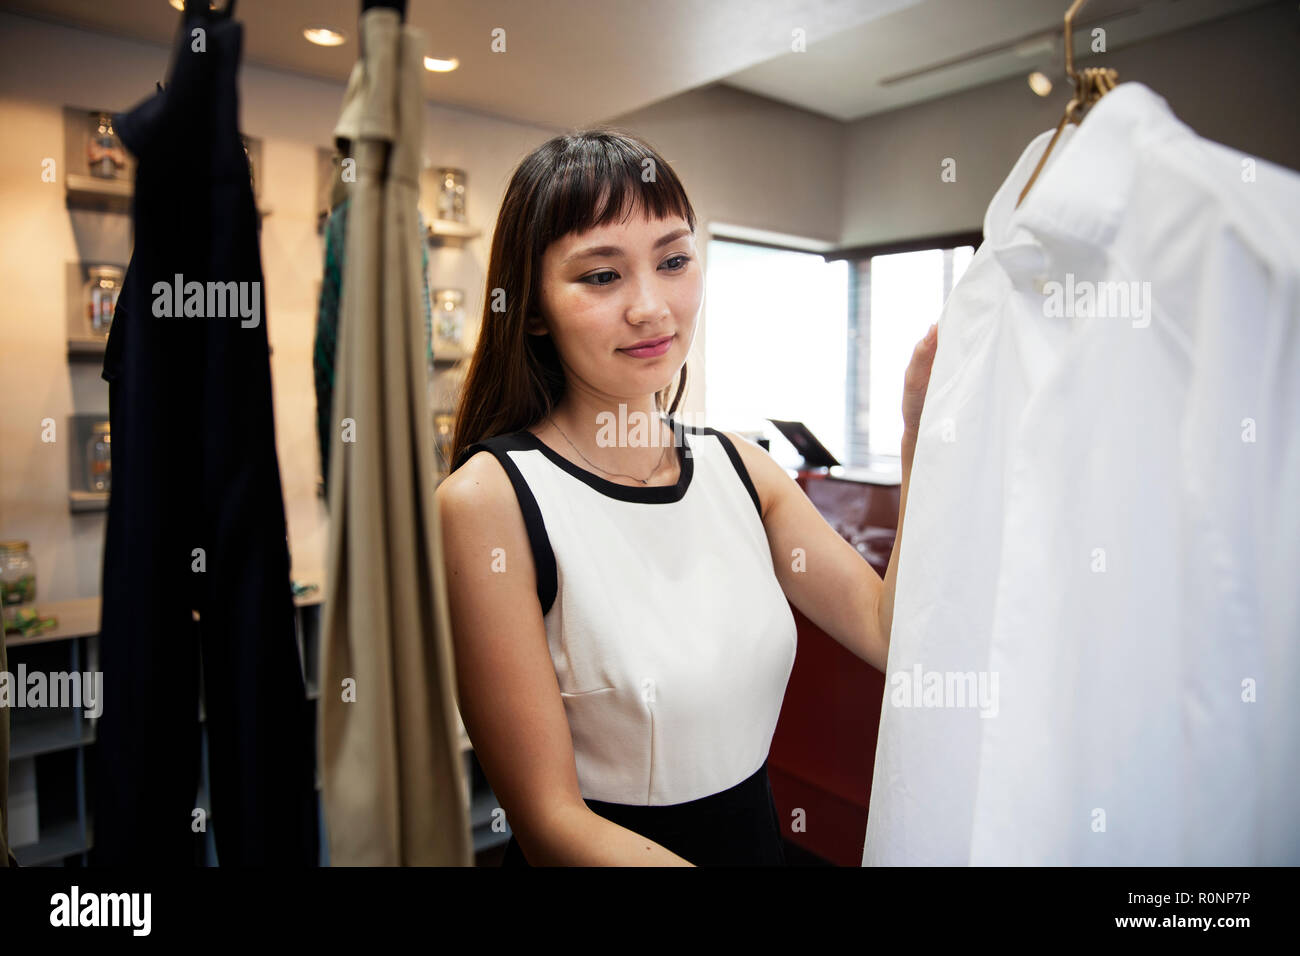 Smiling Japanese saleswoman standing in clothing store, looking at shirt. Stock Photo